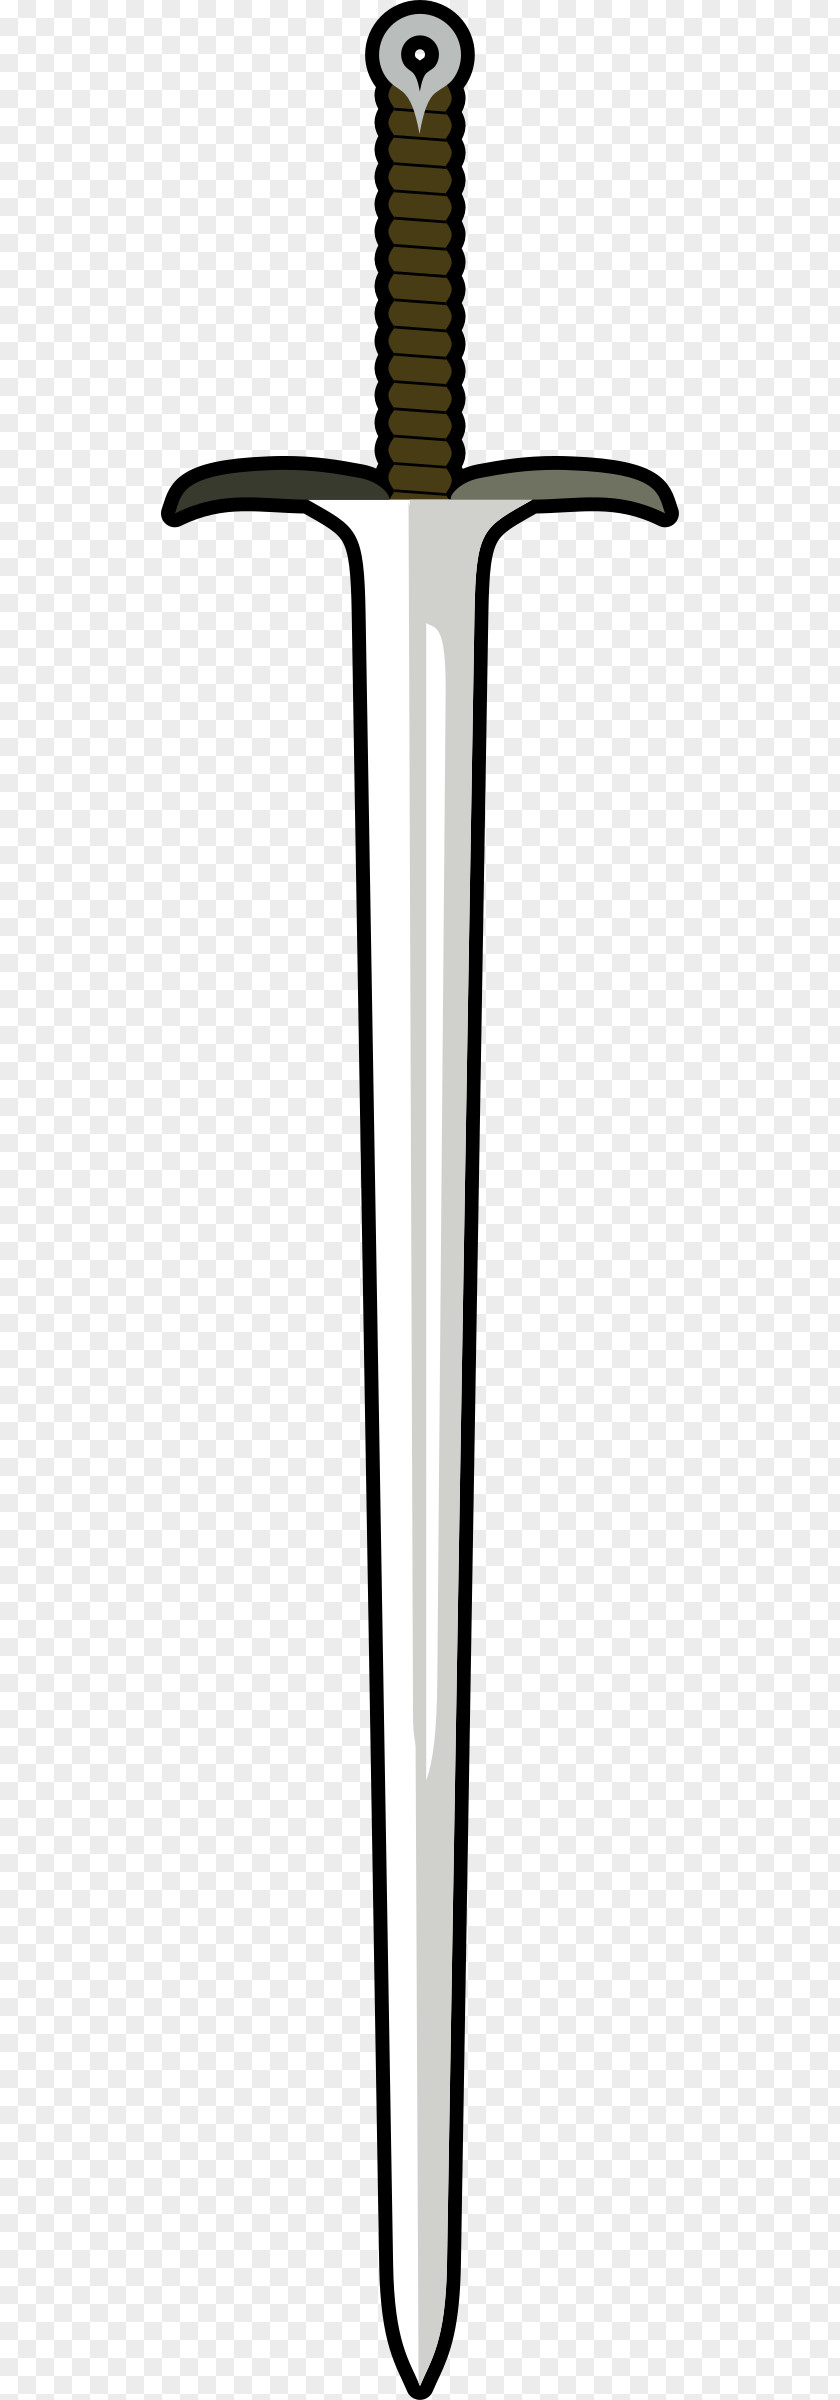 Sword Knightly Weapon Clip Art PNG